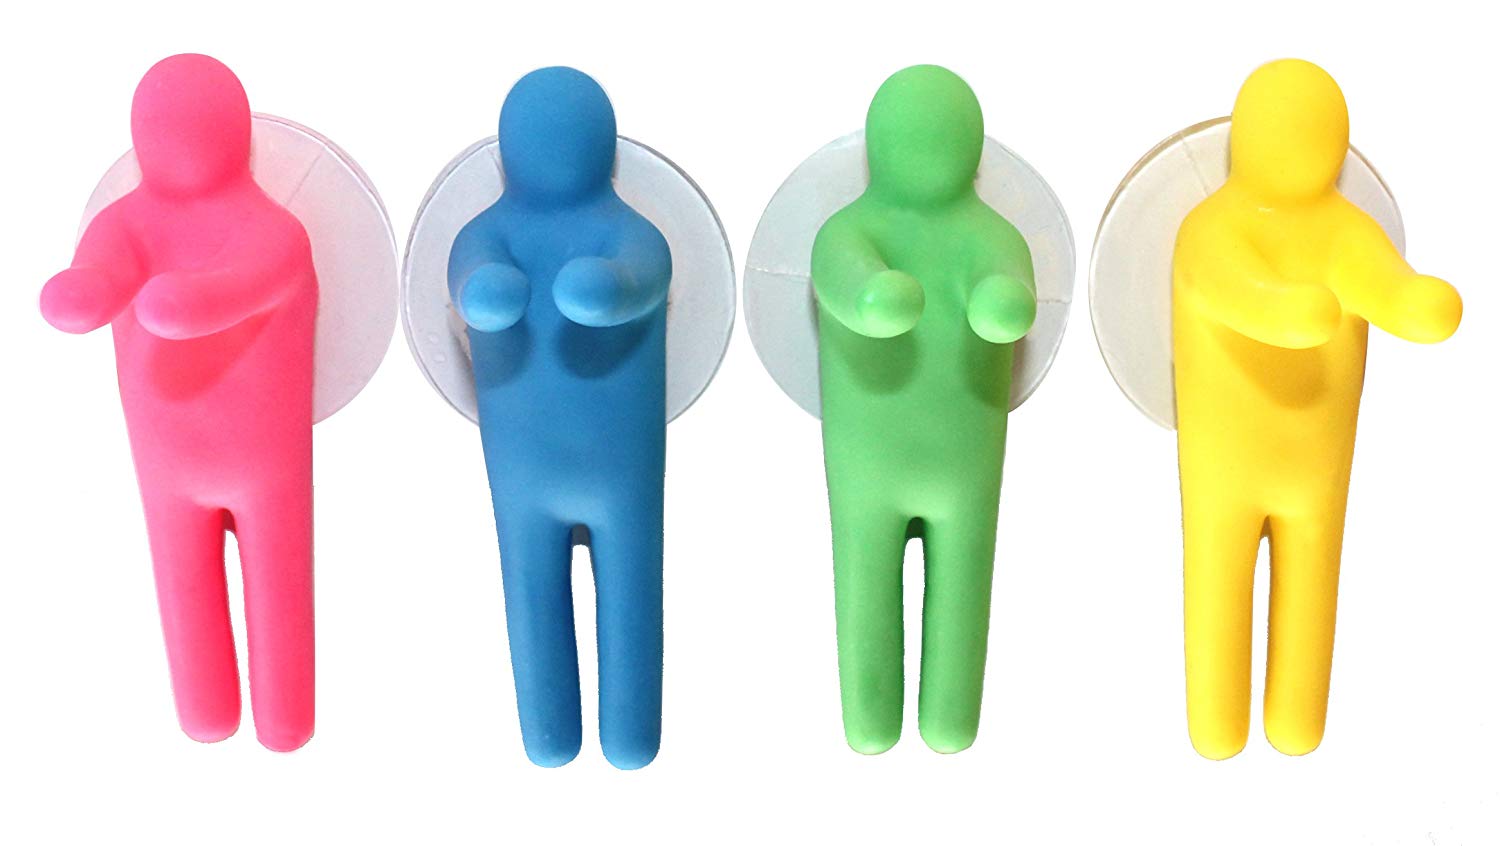 Lucore Colorful People Toothbrush Holder And Utility Suction Hook, Set of 4 Pc